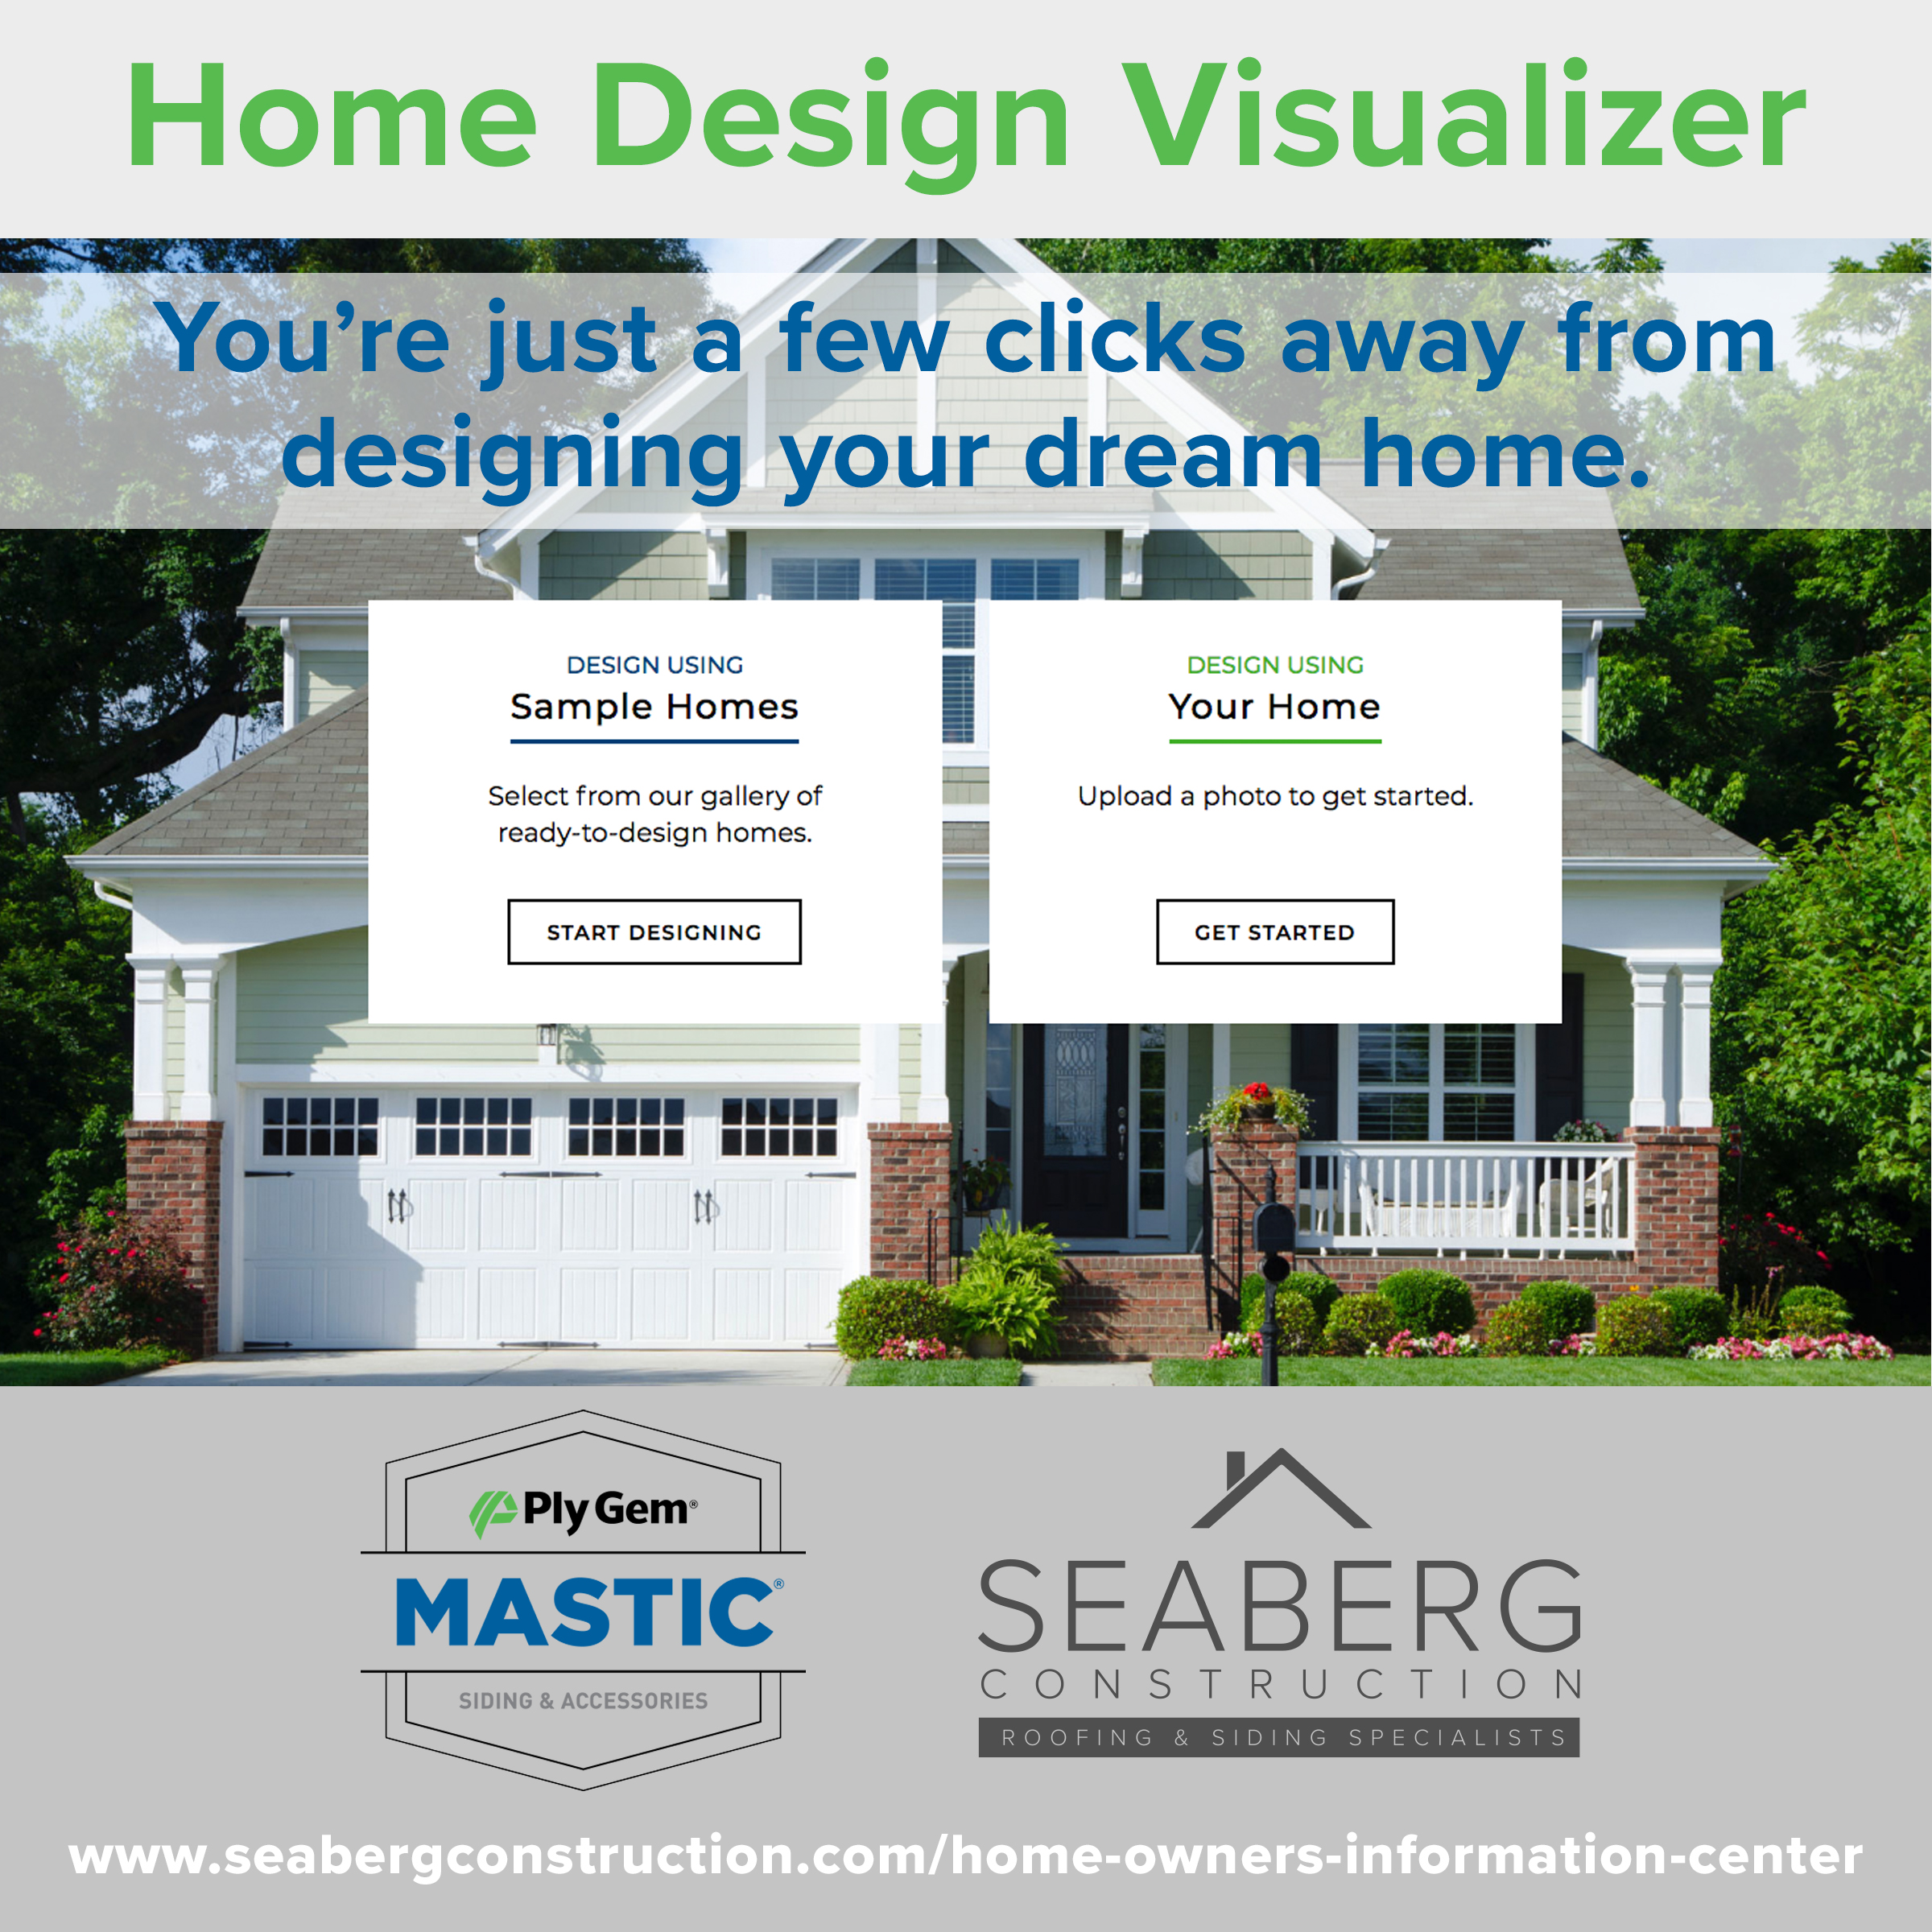 Seaberg Home Design Visualizer By Mastic